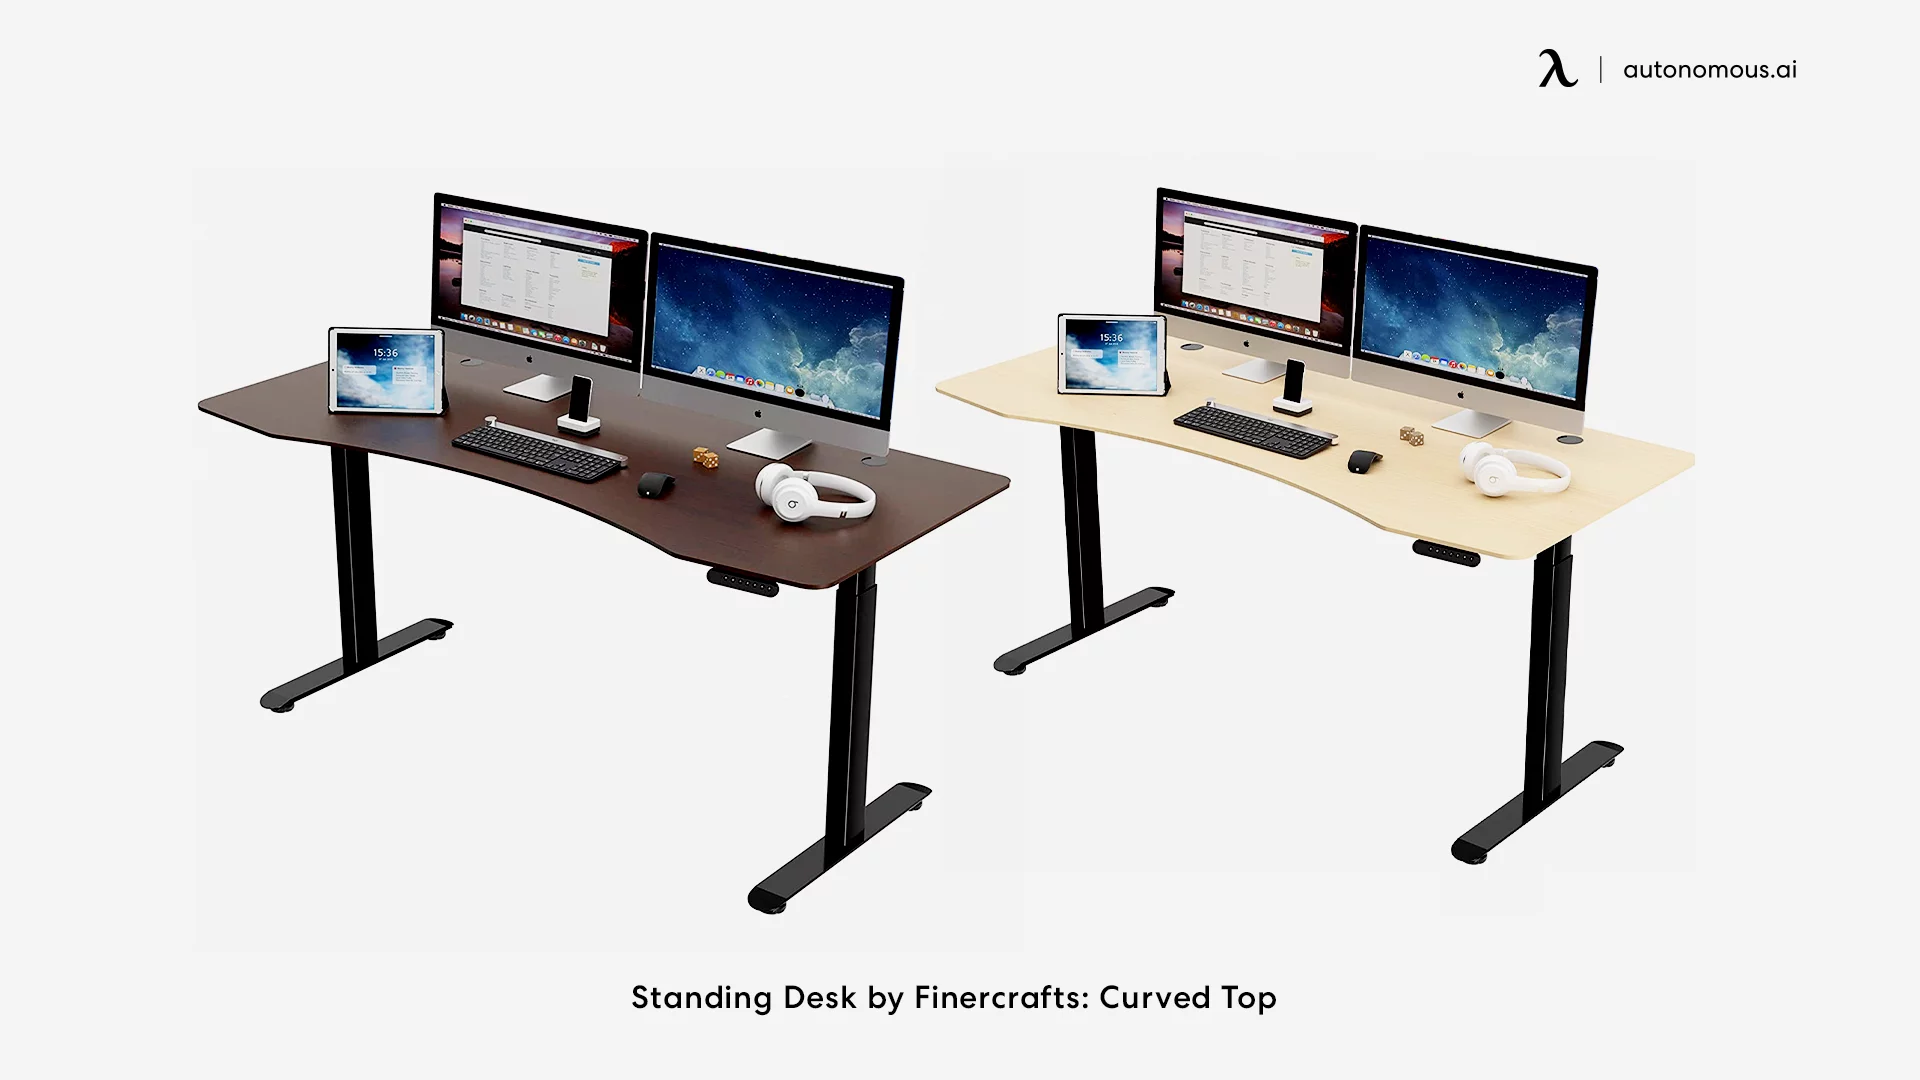 Standing Desk by Finercrafts: Curved Top